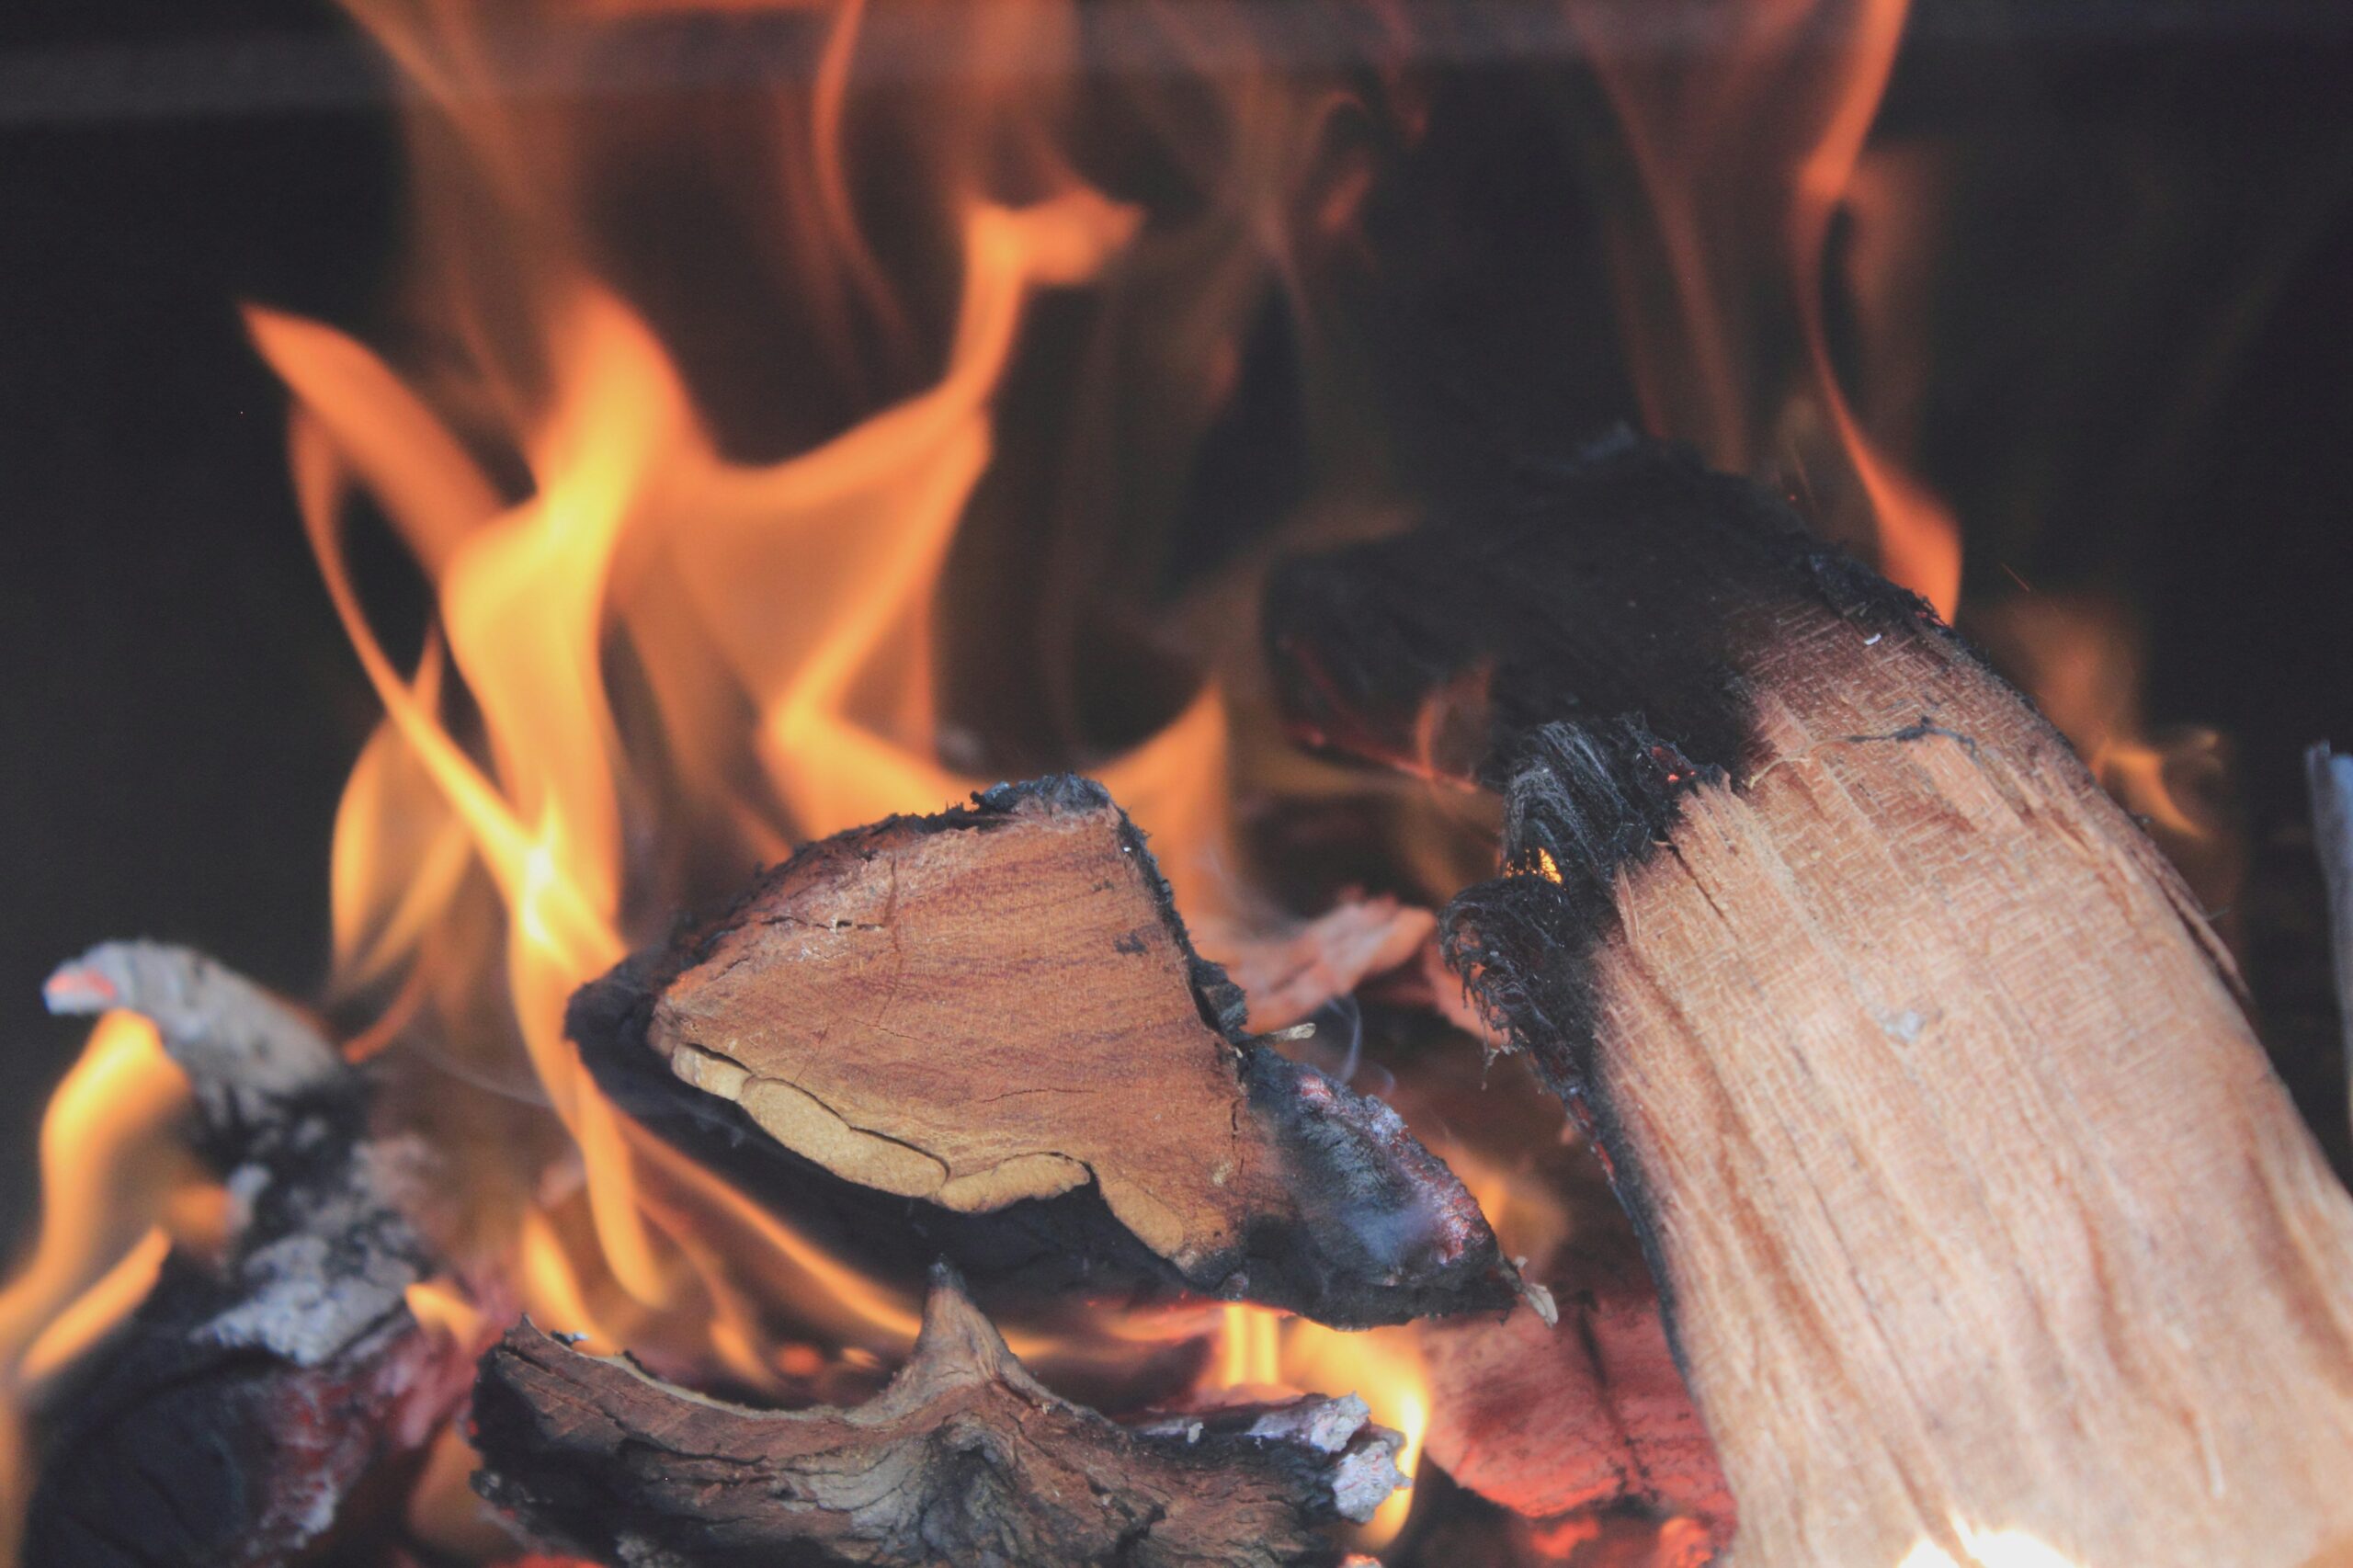 How to Store and Protect Firewood Purchases This Winter